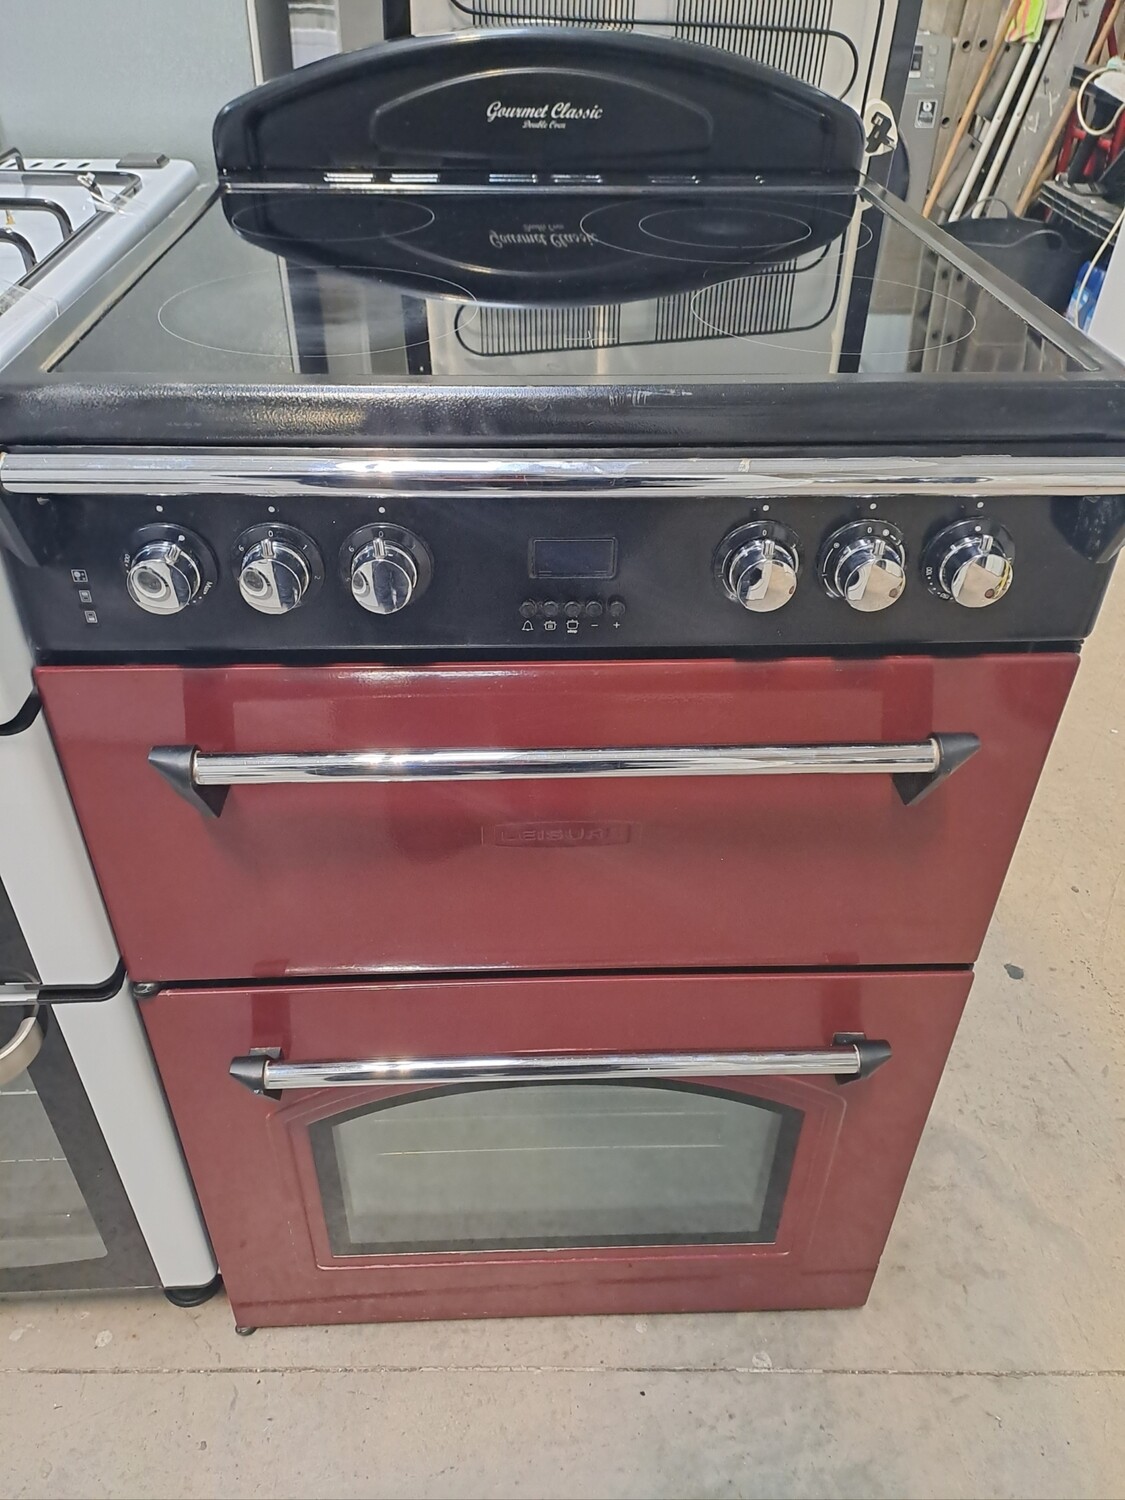 Leisure Gourmet GRB6CVR 60cm Electric Cooker Double Oven Ceramic Hob - Red - Refurbished 6 Month Guarantee. This item is located in our Whitby Road Shop 